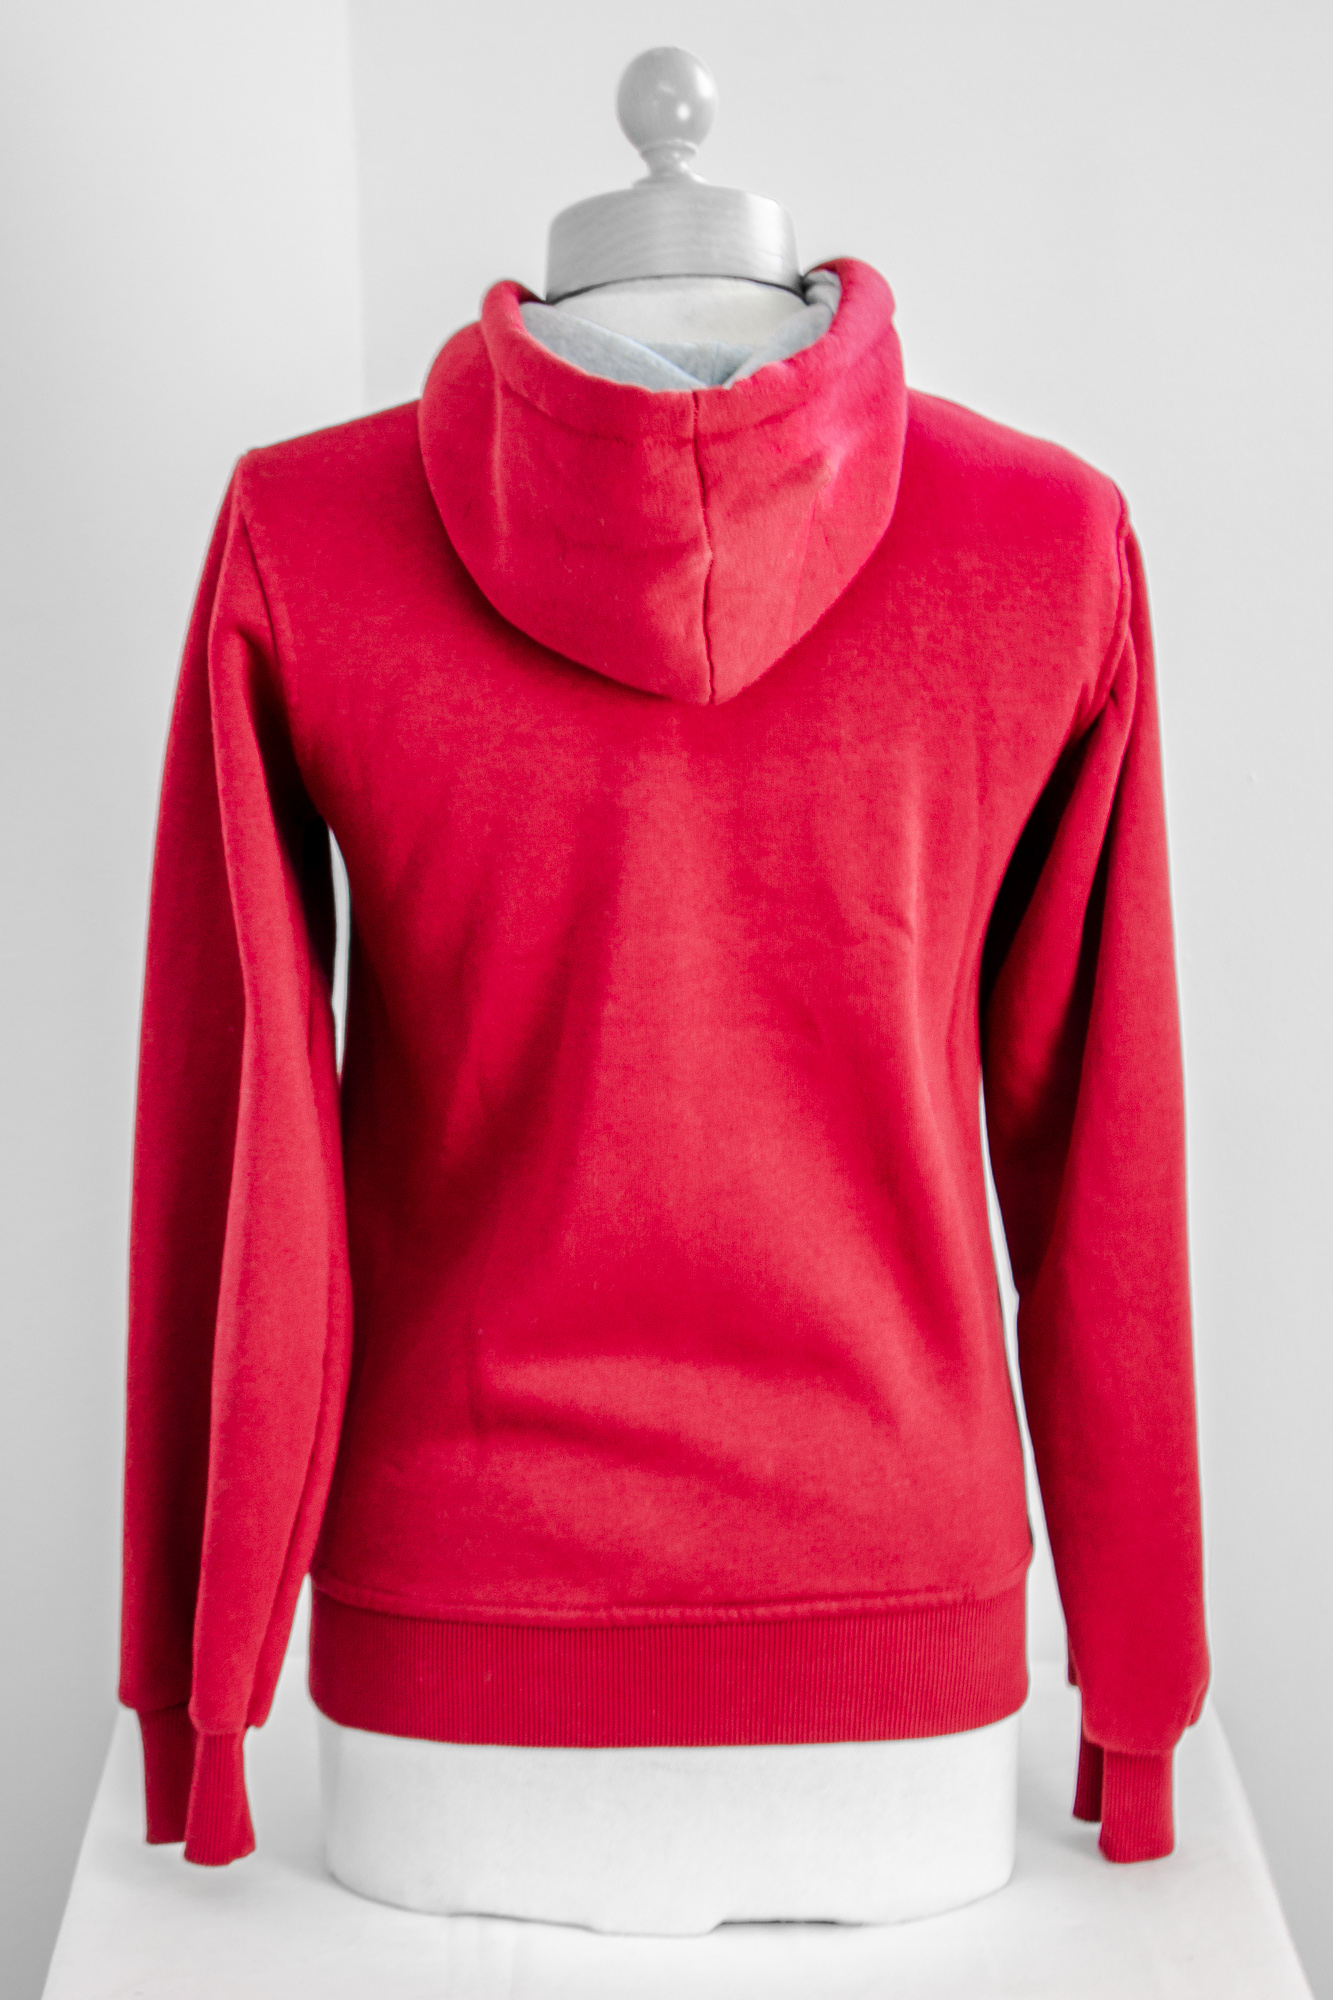 Ladies Hollister Hoodie - Hope Cancer Support Centre